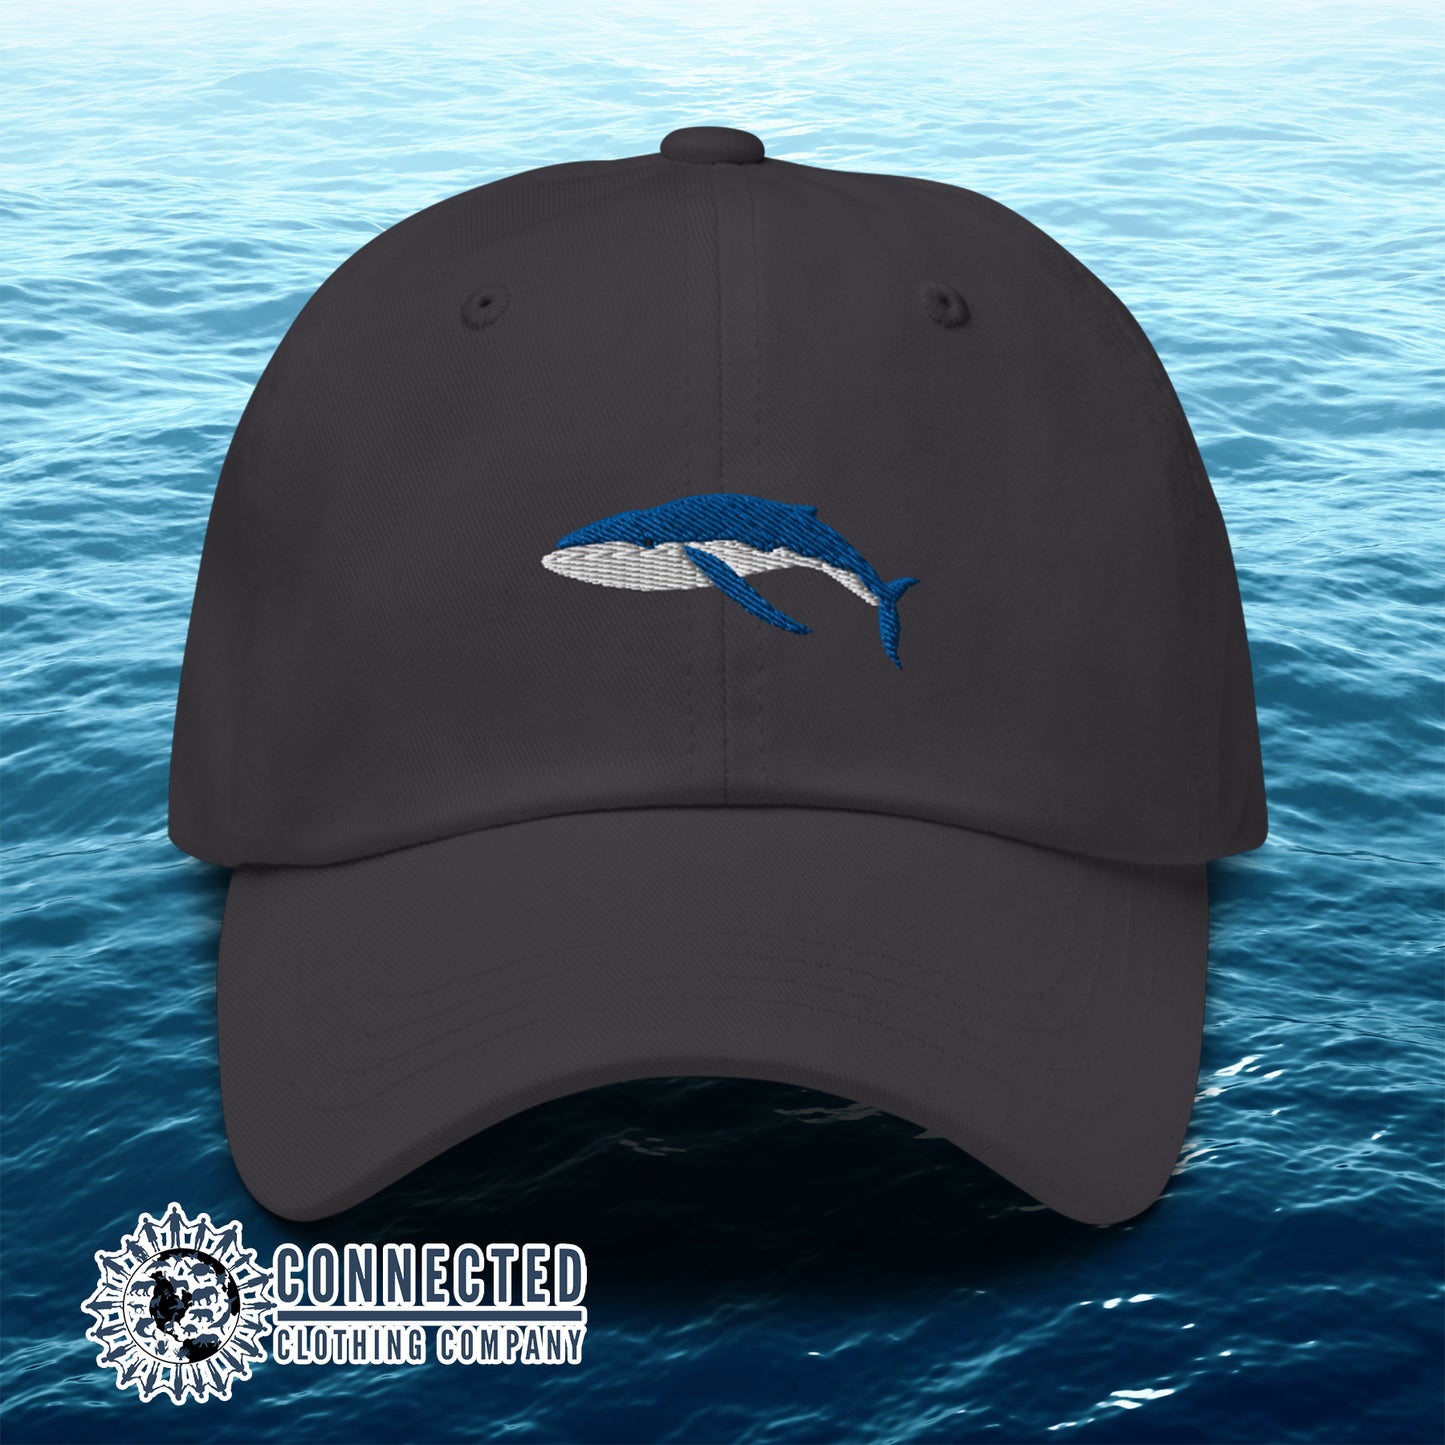 Grey Humpback Whale Cotton Cap - Connected Clothing Company - 10% of profits donated to Mission Blue ocean conservation